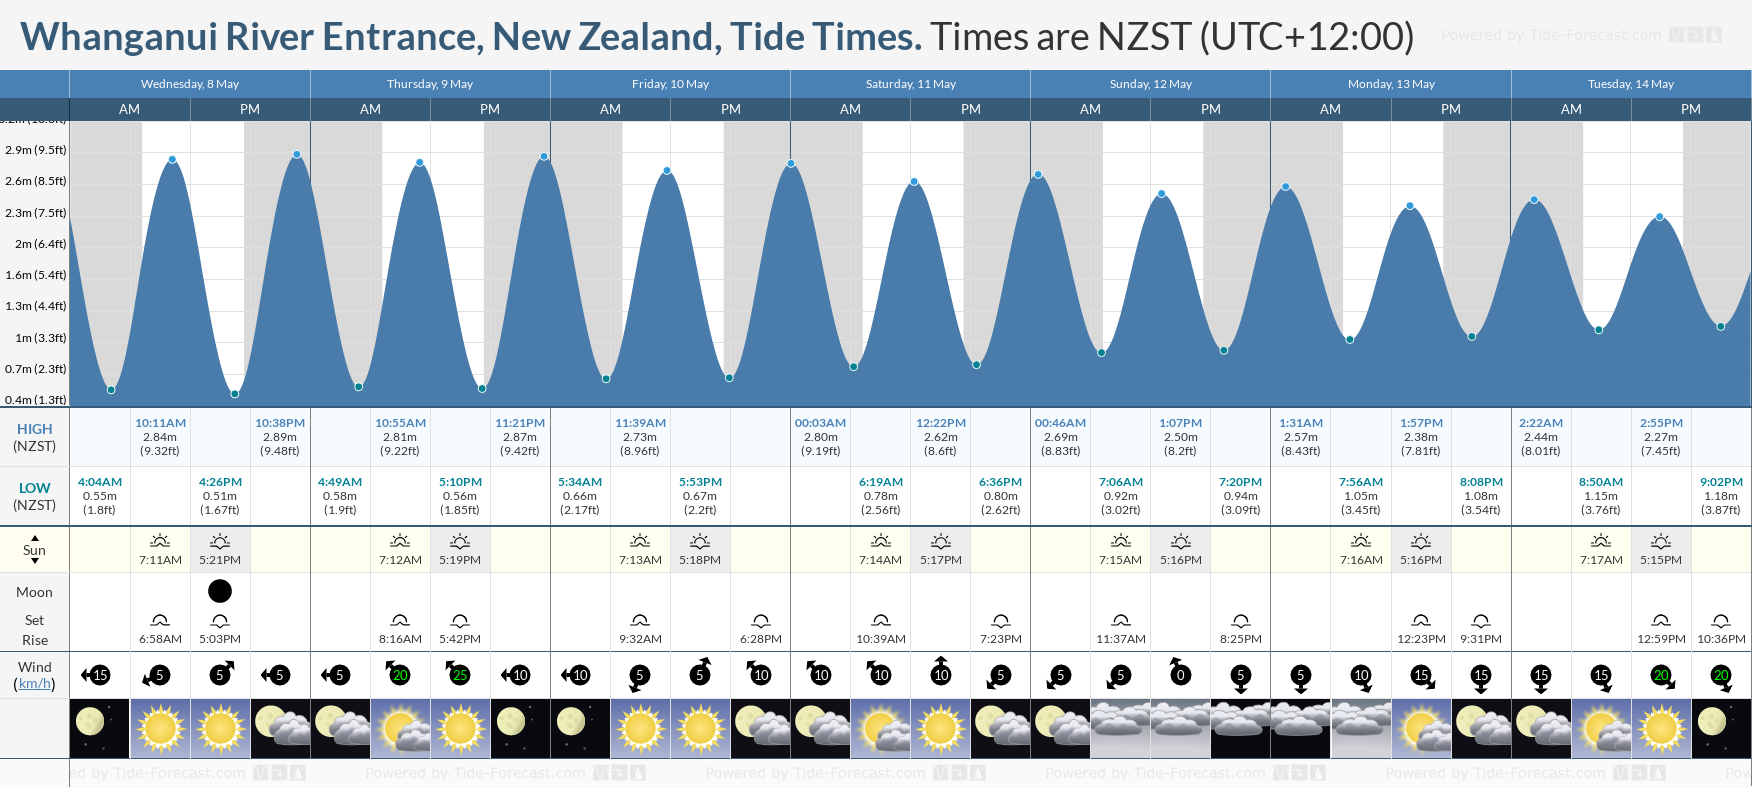 Whanganui River Entrance, New Zealand Tide Chart including high and low tide tide times for the next 7 days